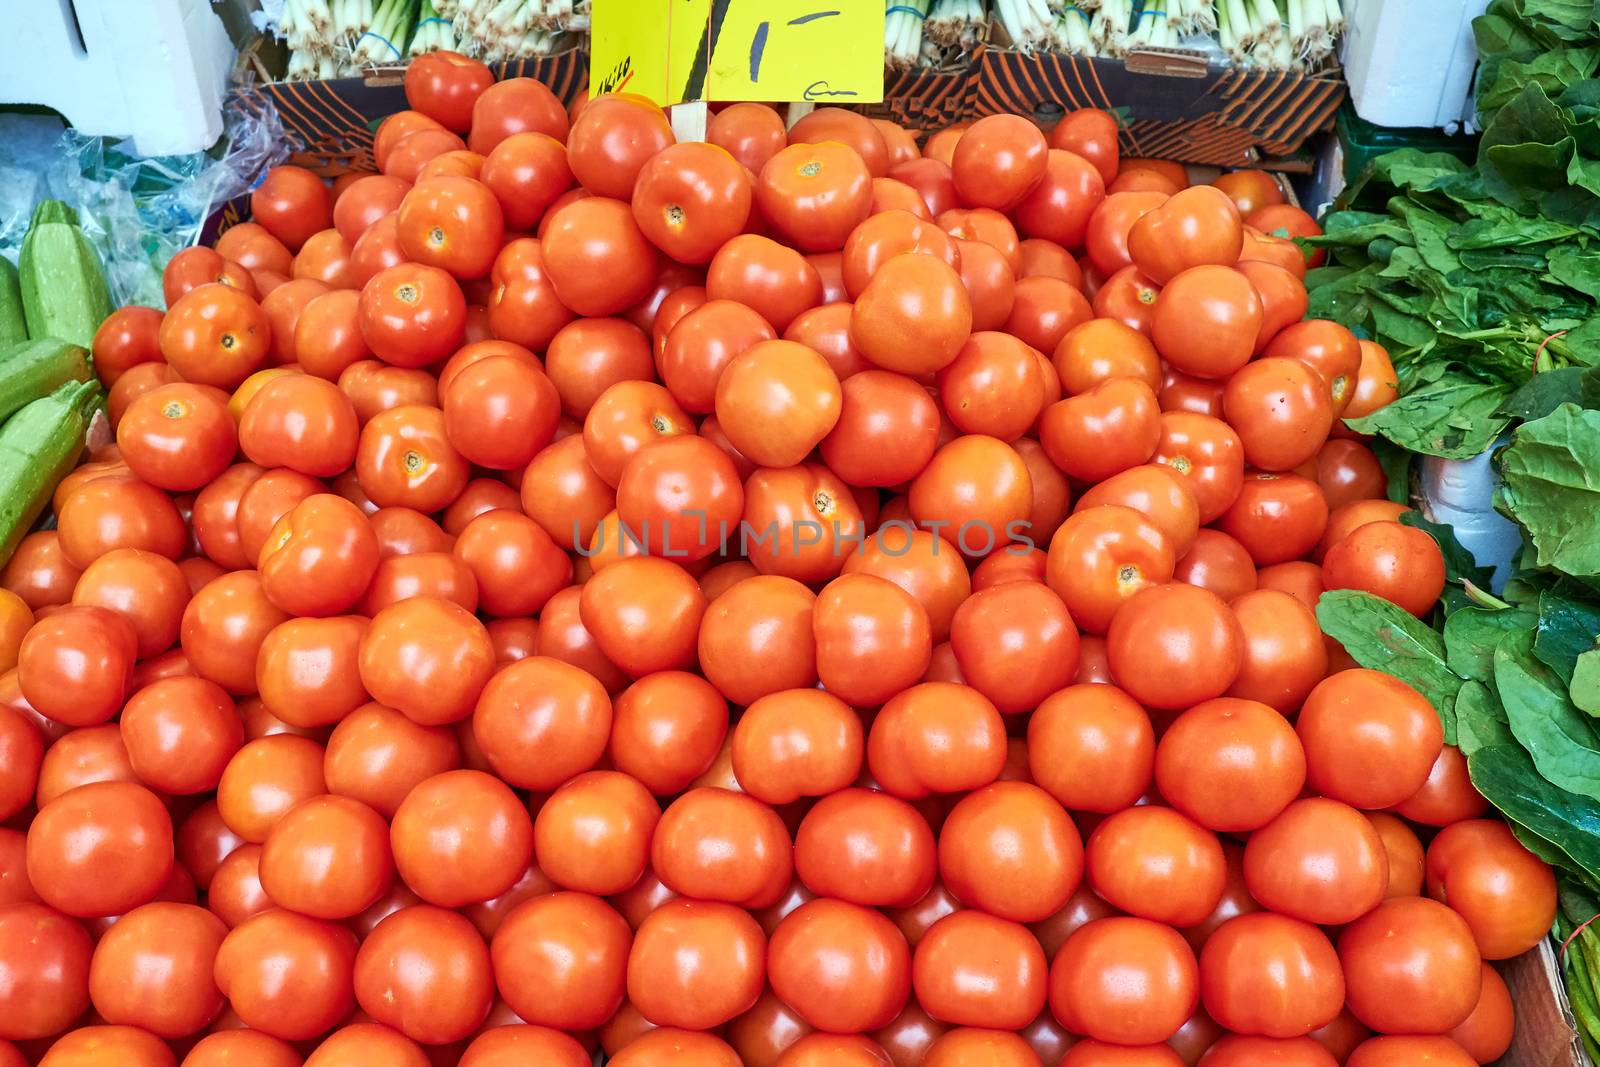 Pile of ripe red tomatoes for sale at a market